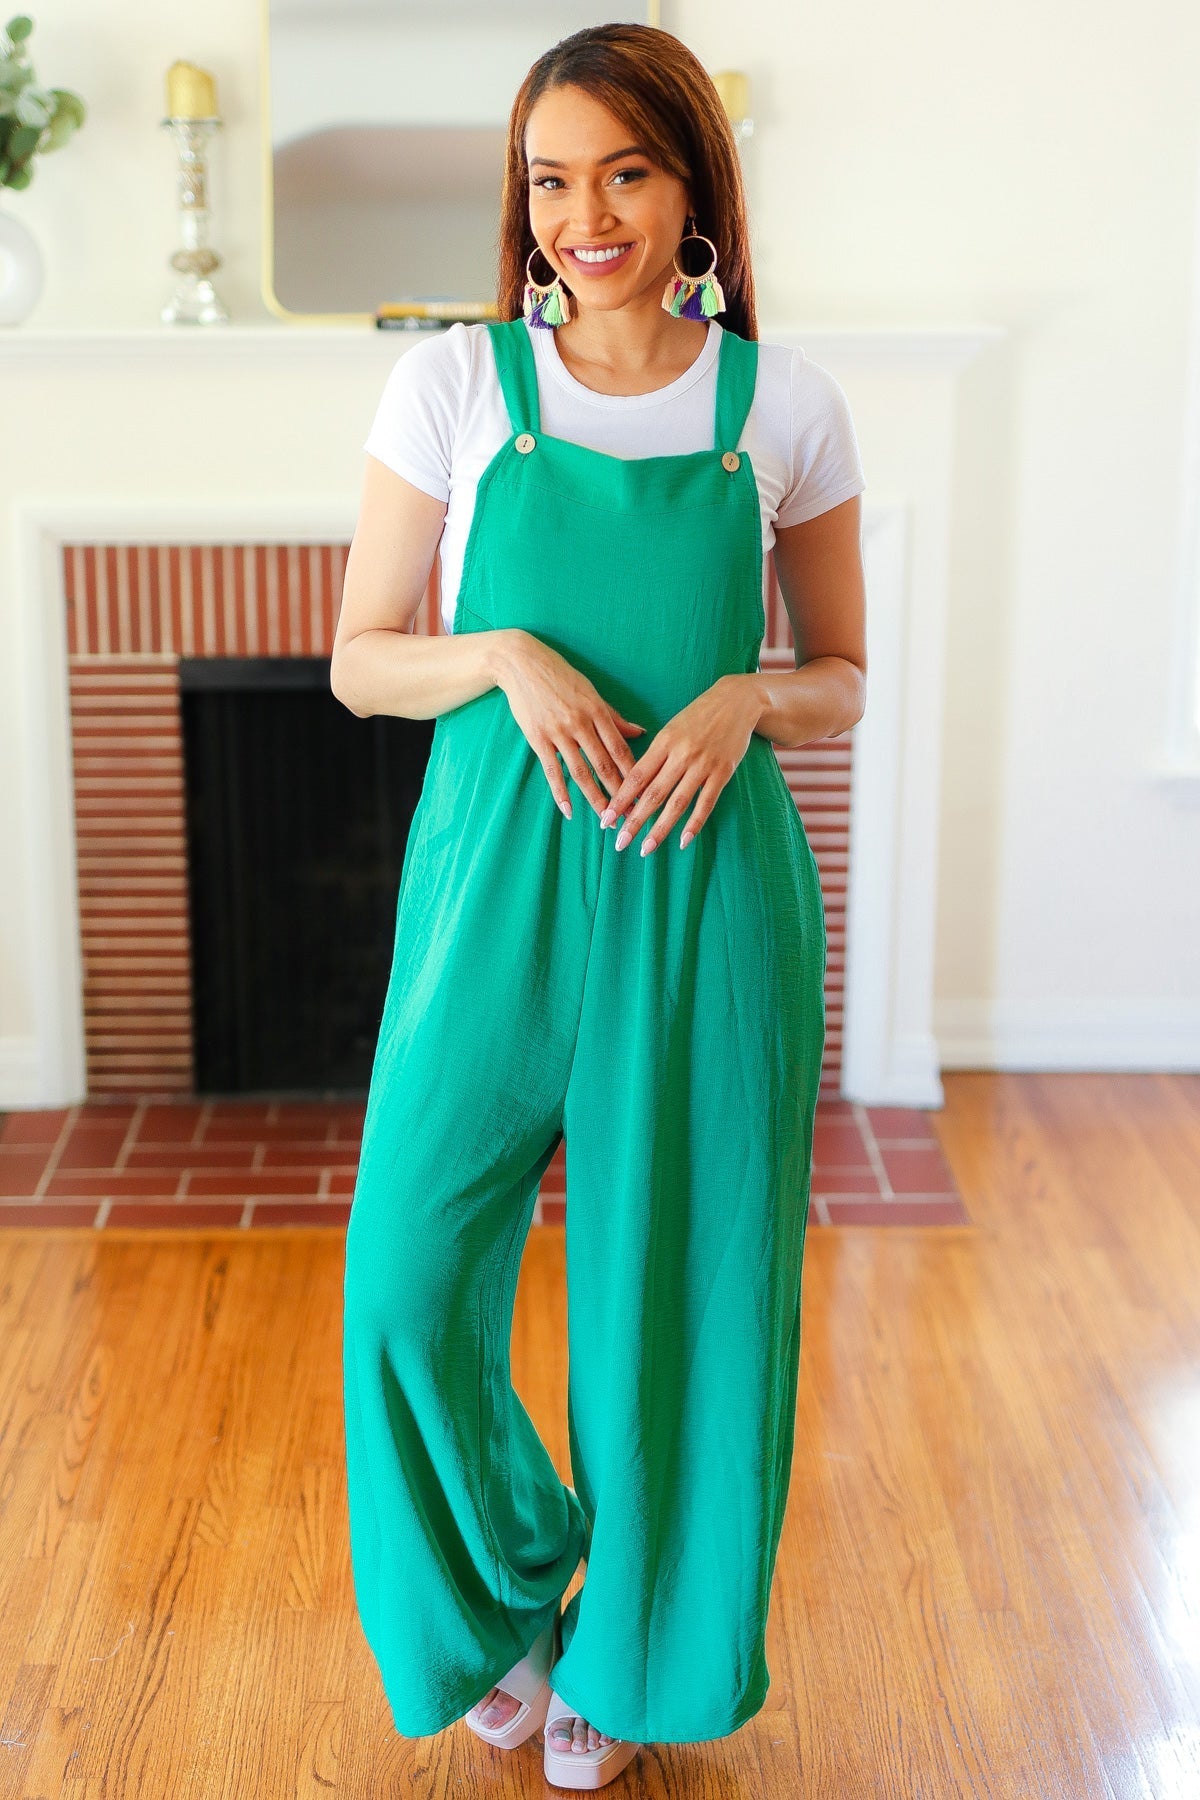 Summer Dreaming Emerald Wide Leg Suspender Overall Jumpsuit (Shipping in 1-2 Weeks)